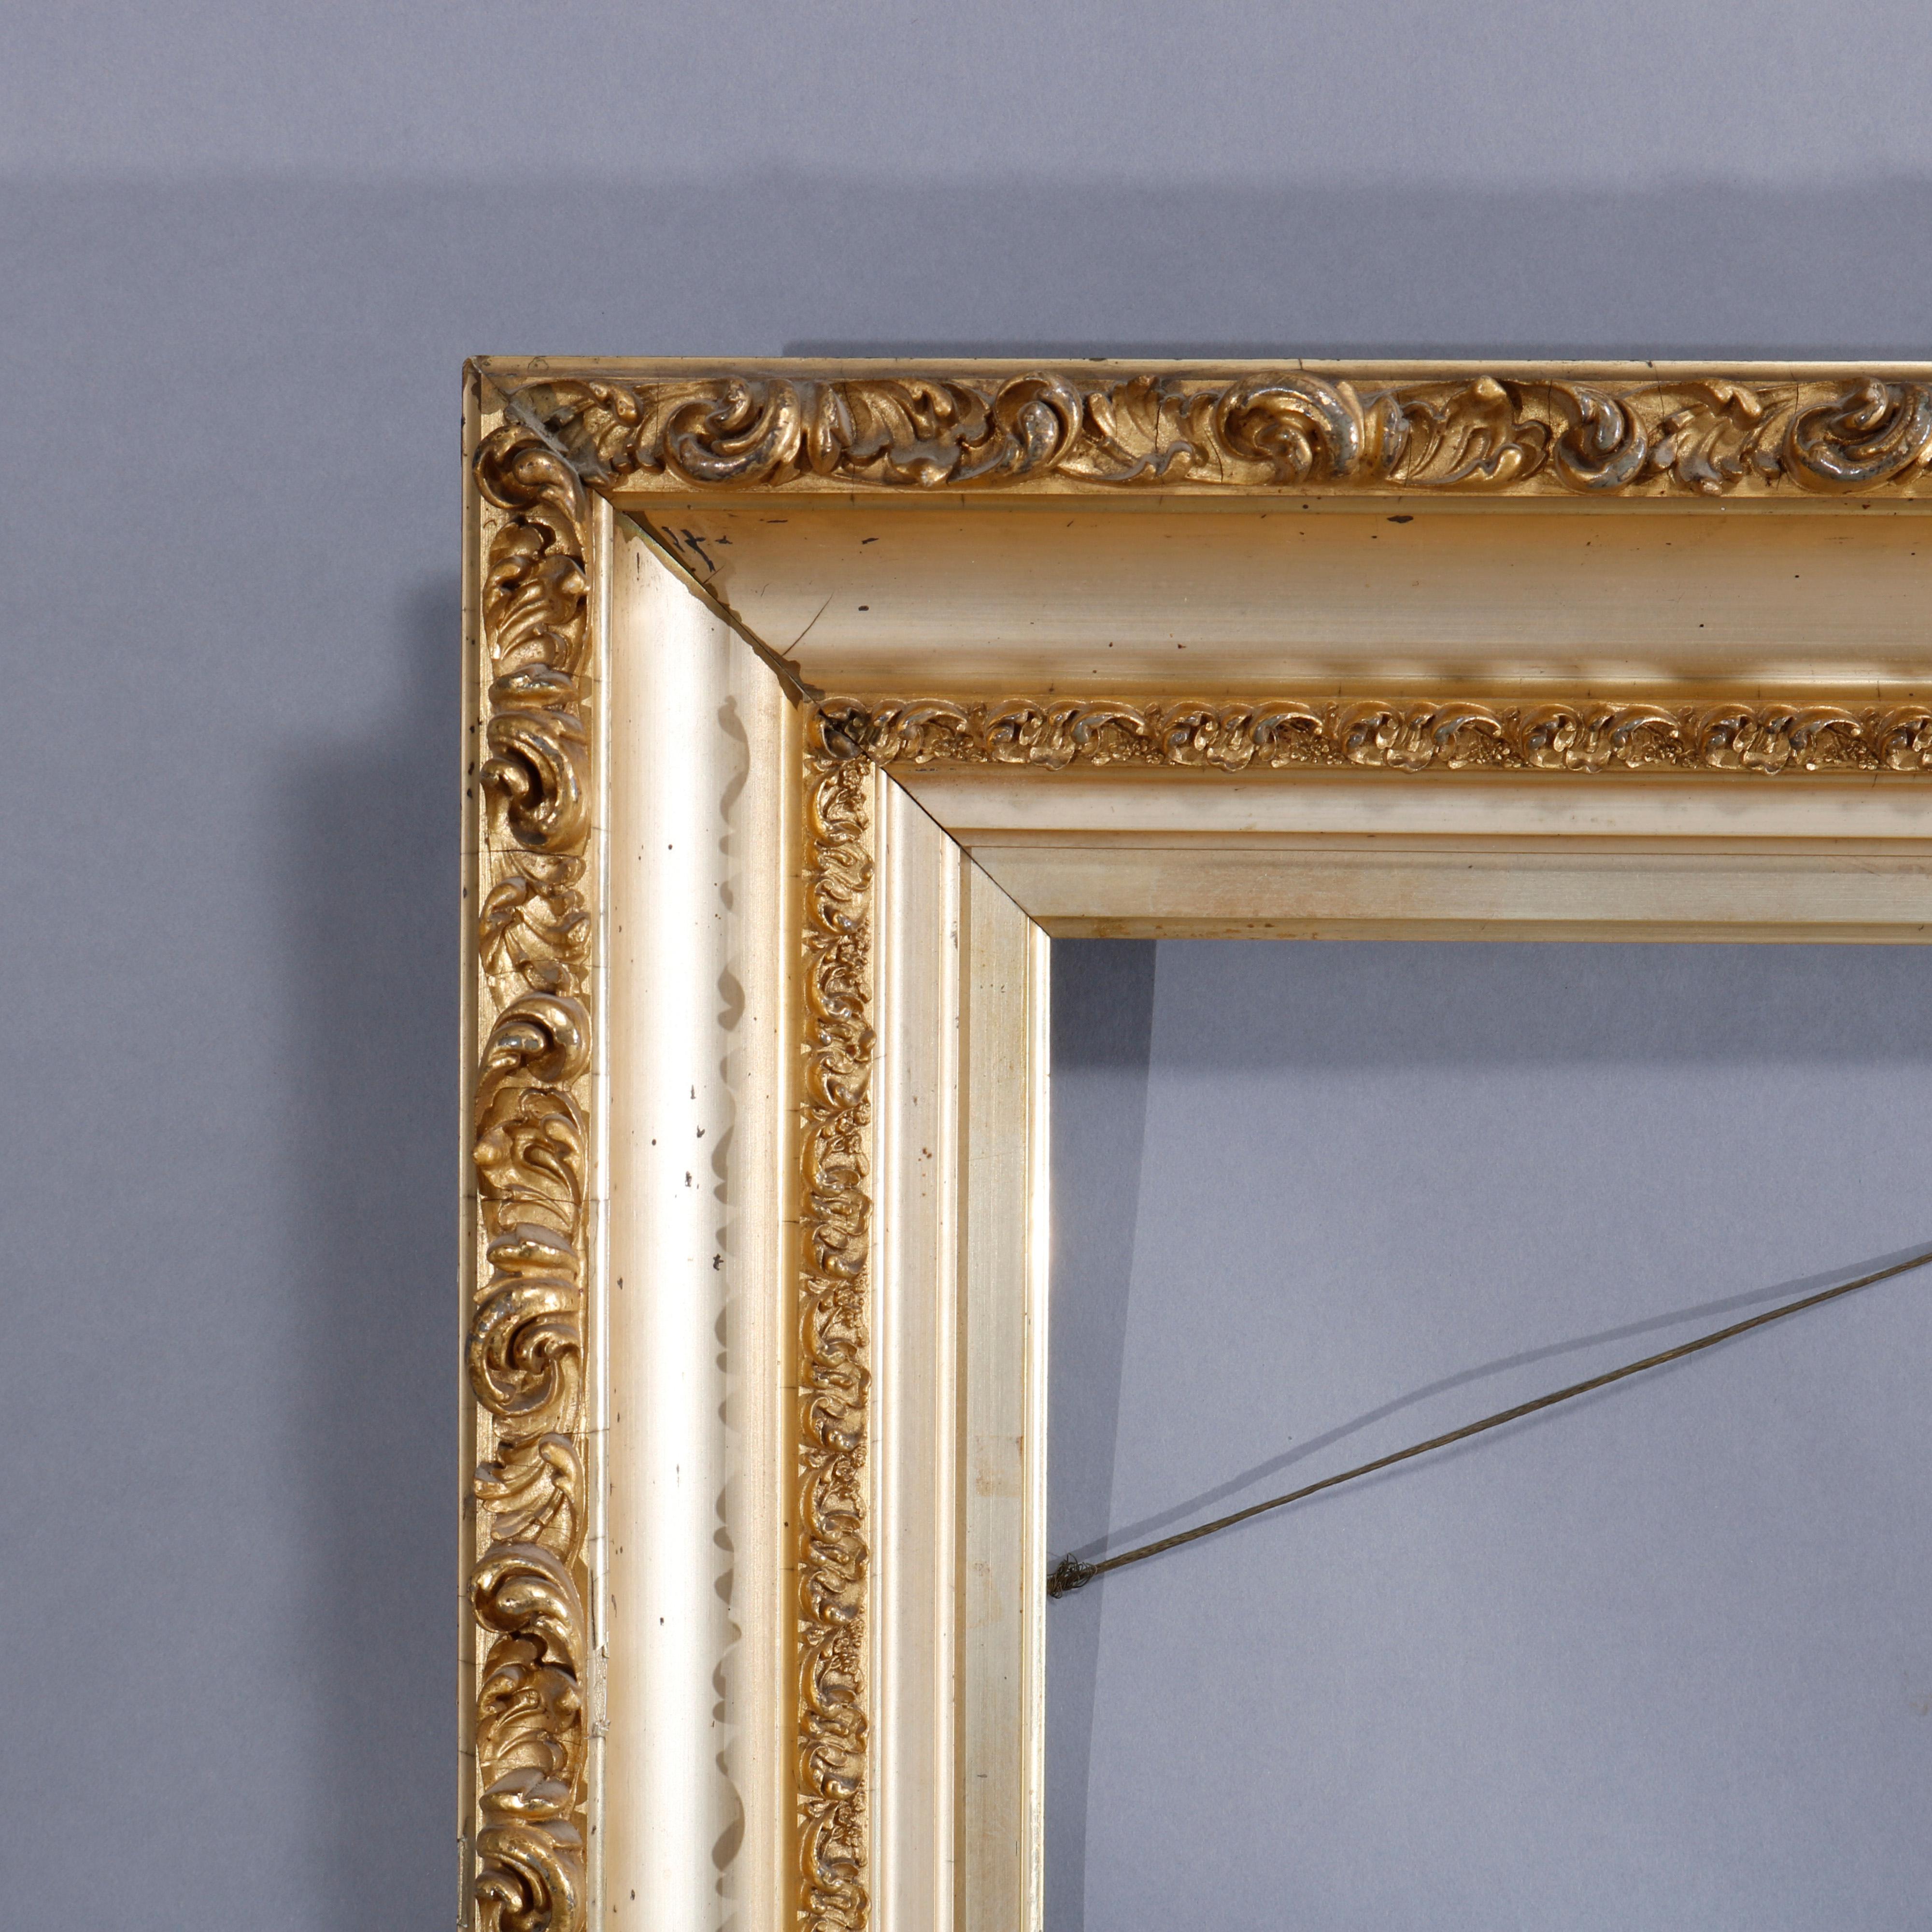 An antique Victorian painting or picture art frame offers giltwood construction with scroll and foliate form banding, circa 1890

Measures: 31.5